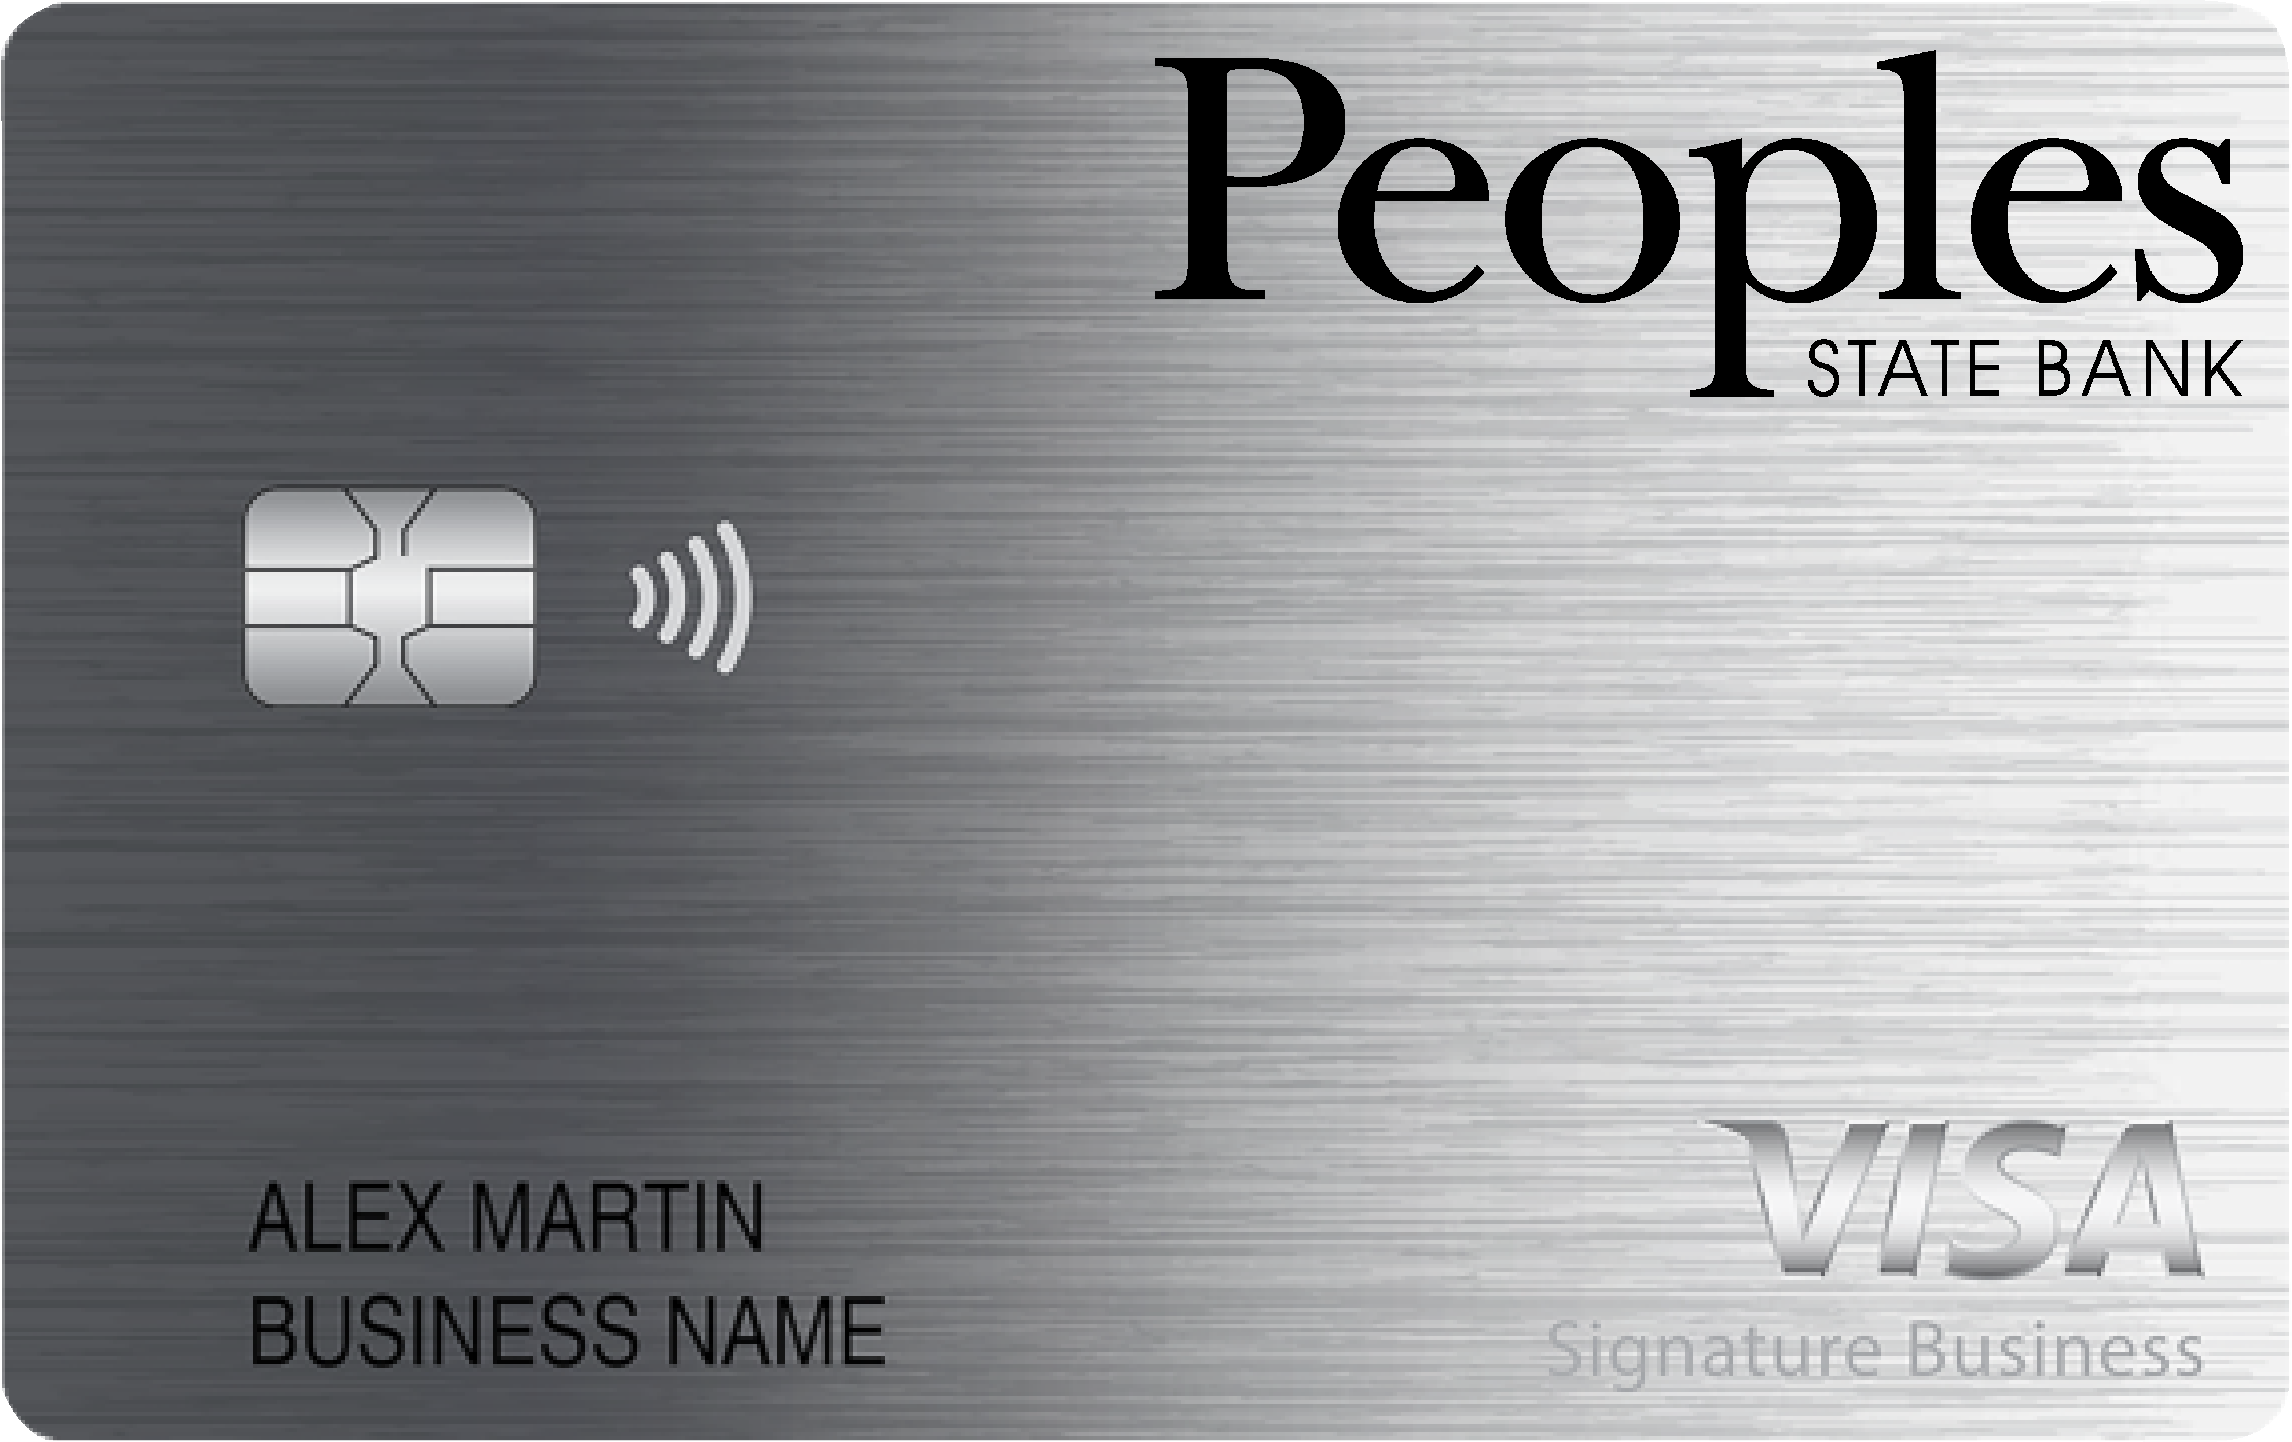 Peoples State Bank Smart Business Rewards Card